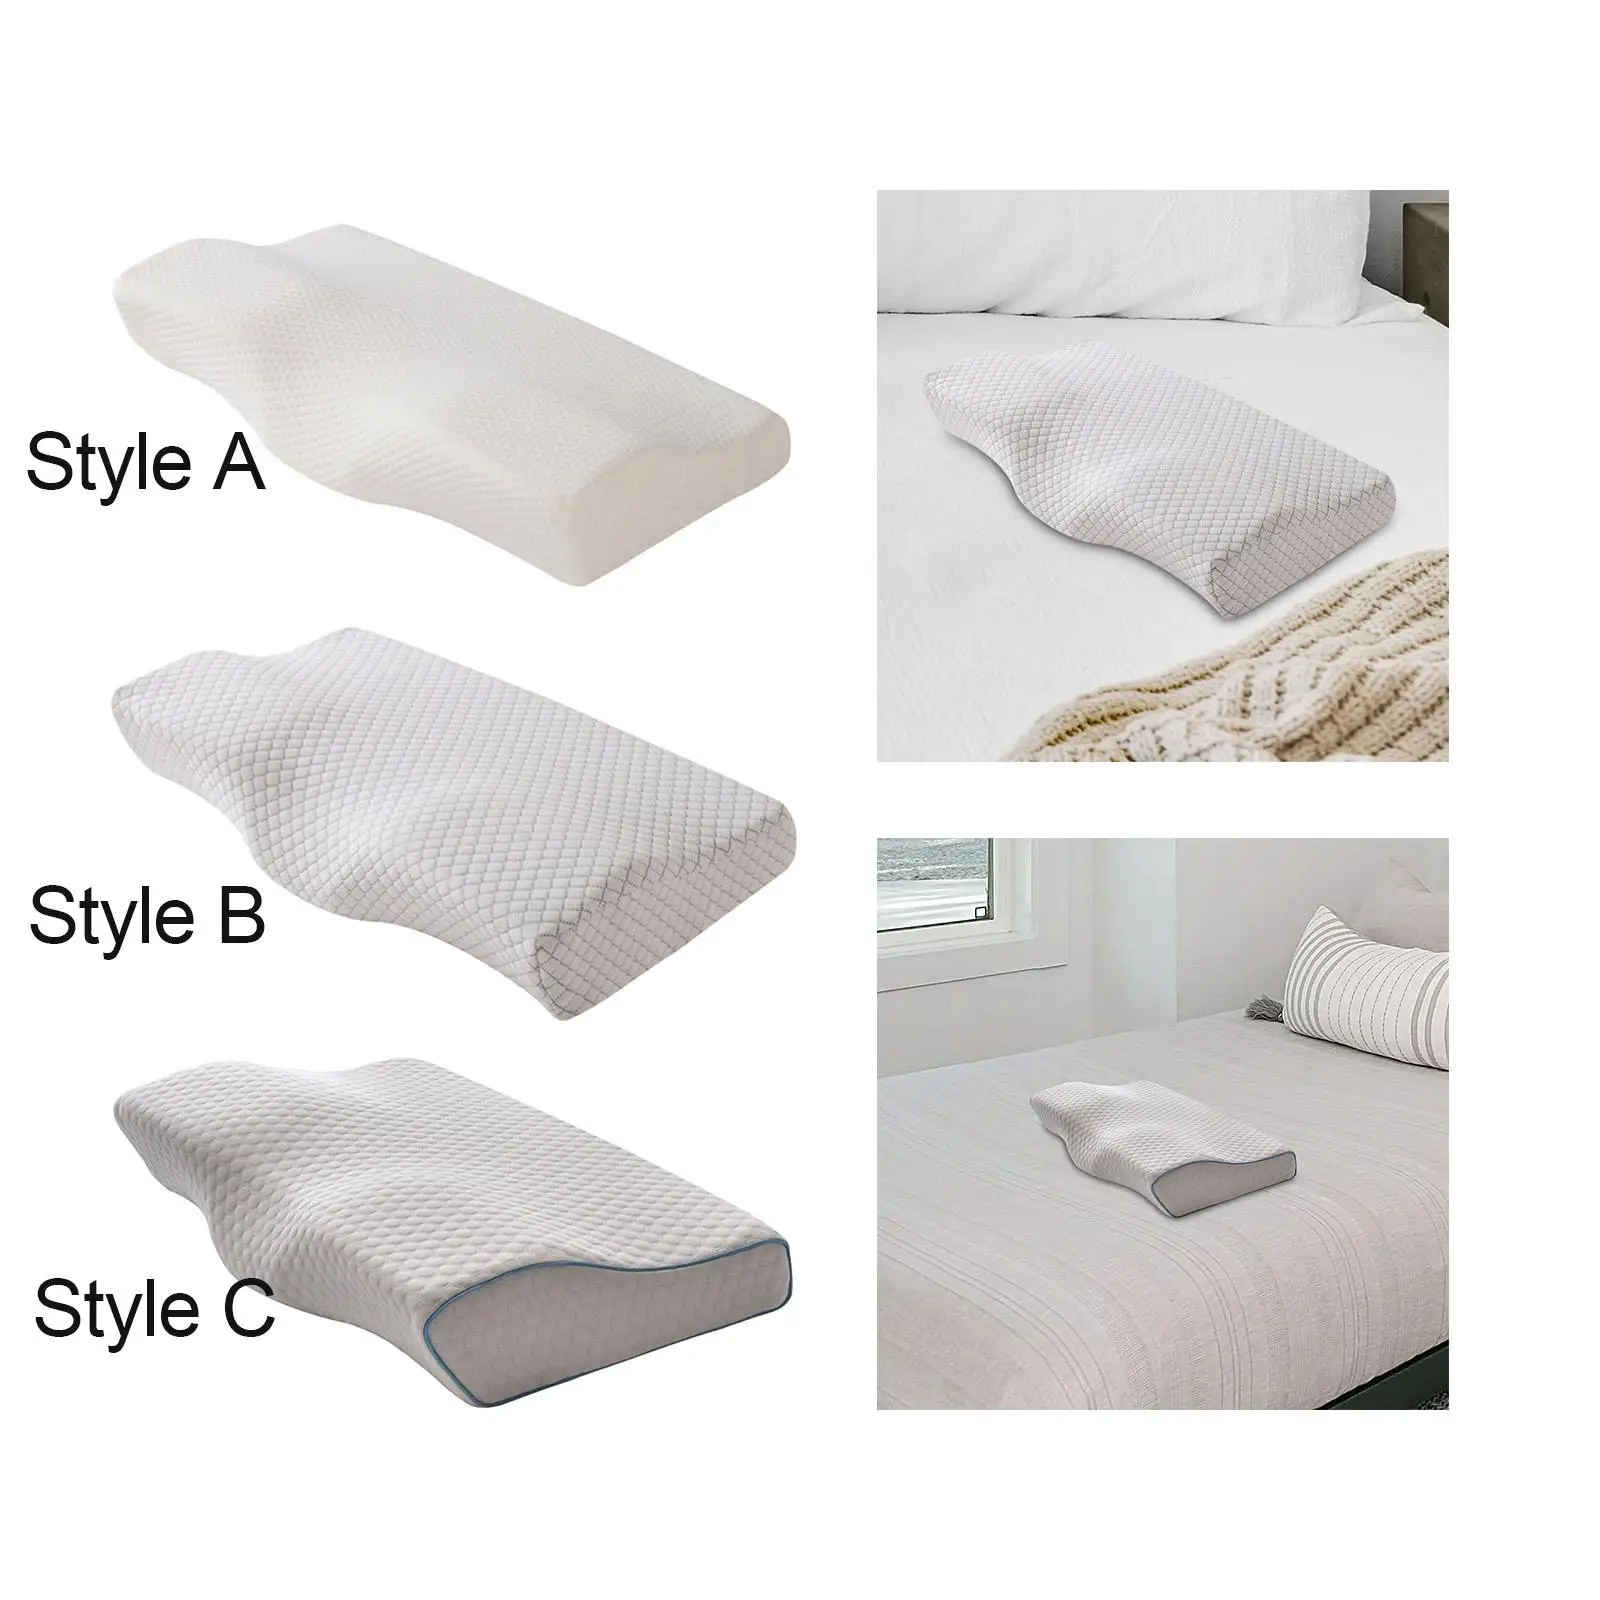 Butterfly Shaped Cervical Memory Foam Pillow Neck Pillows Bed Support Pillow for Hotel Side Sleepers Bedroom Sleeping